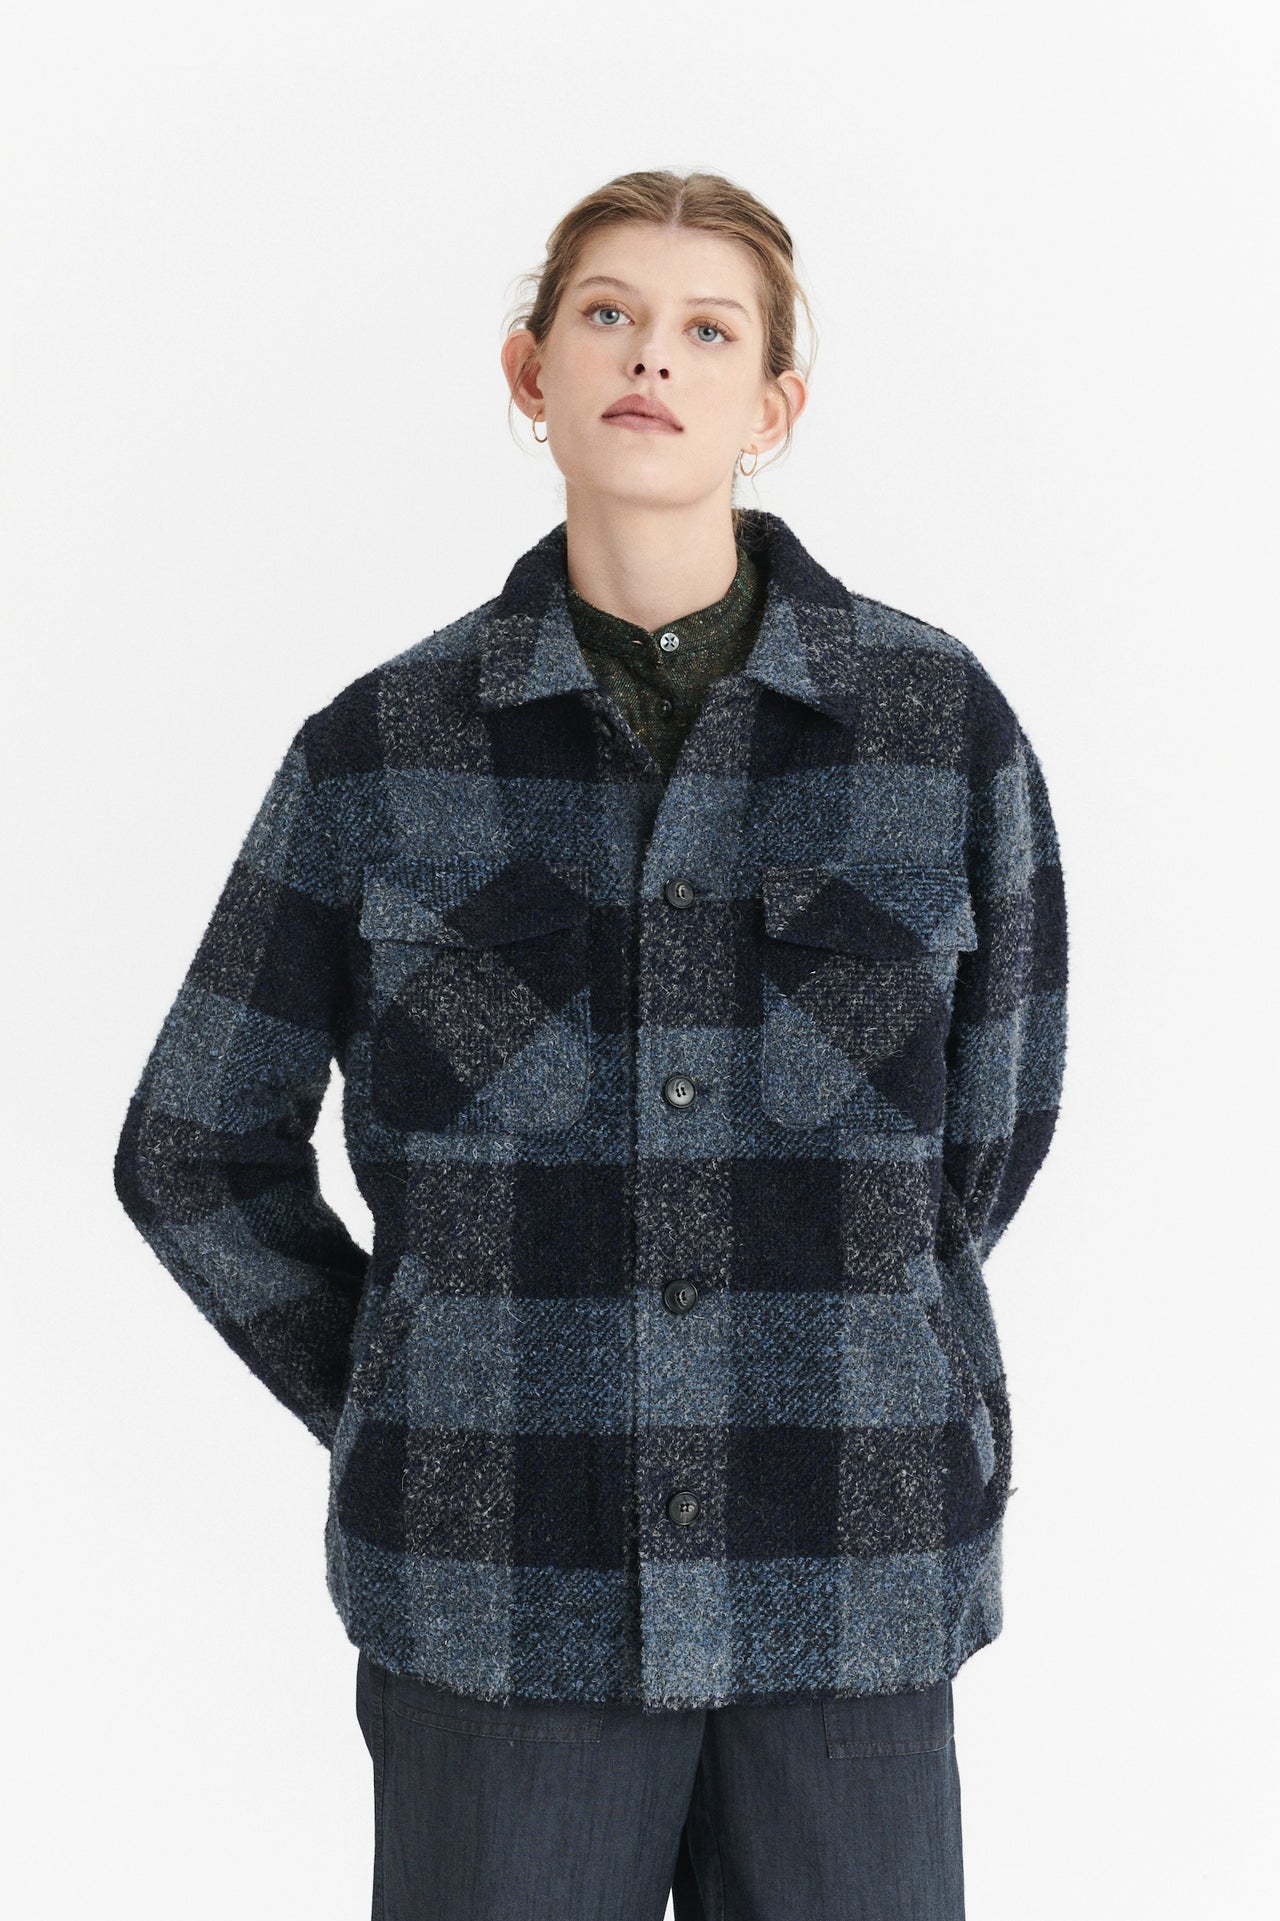 Unisex Winter Jacket in a Tonal Navy and Grey Chequered Italian Virgin and Alpaca Wool with MEIDA Thermo Insulation